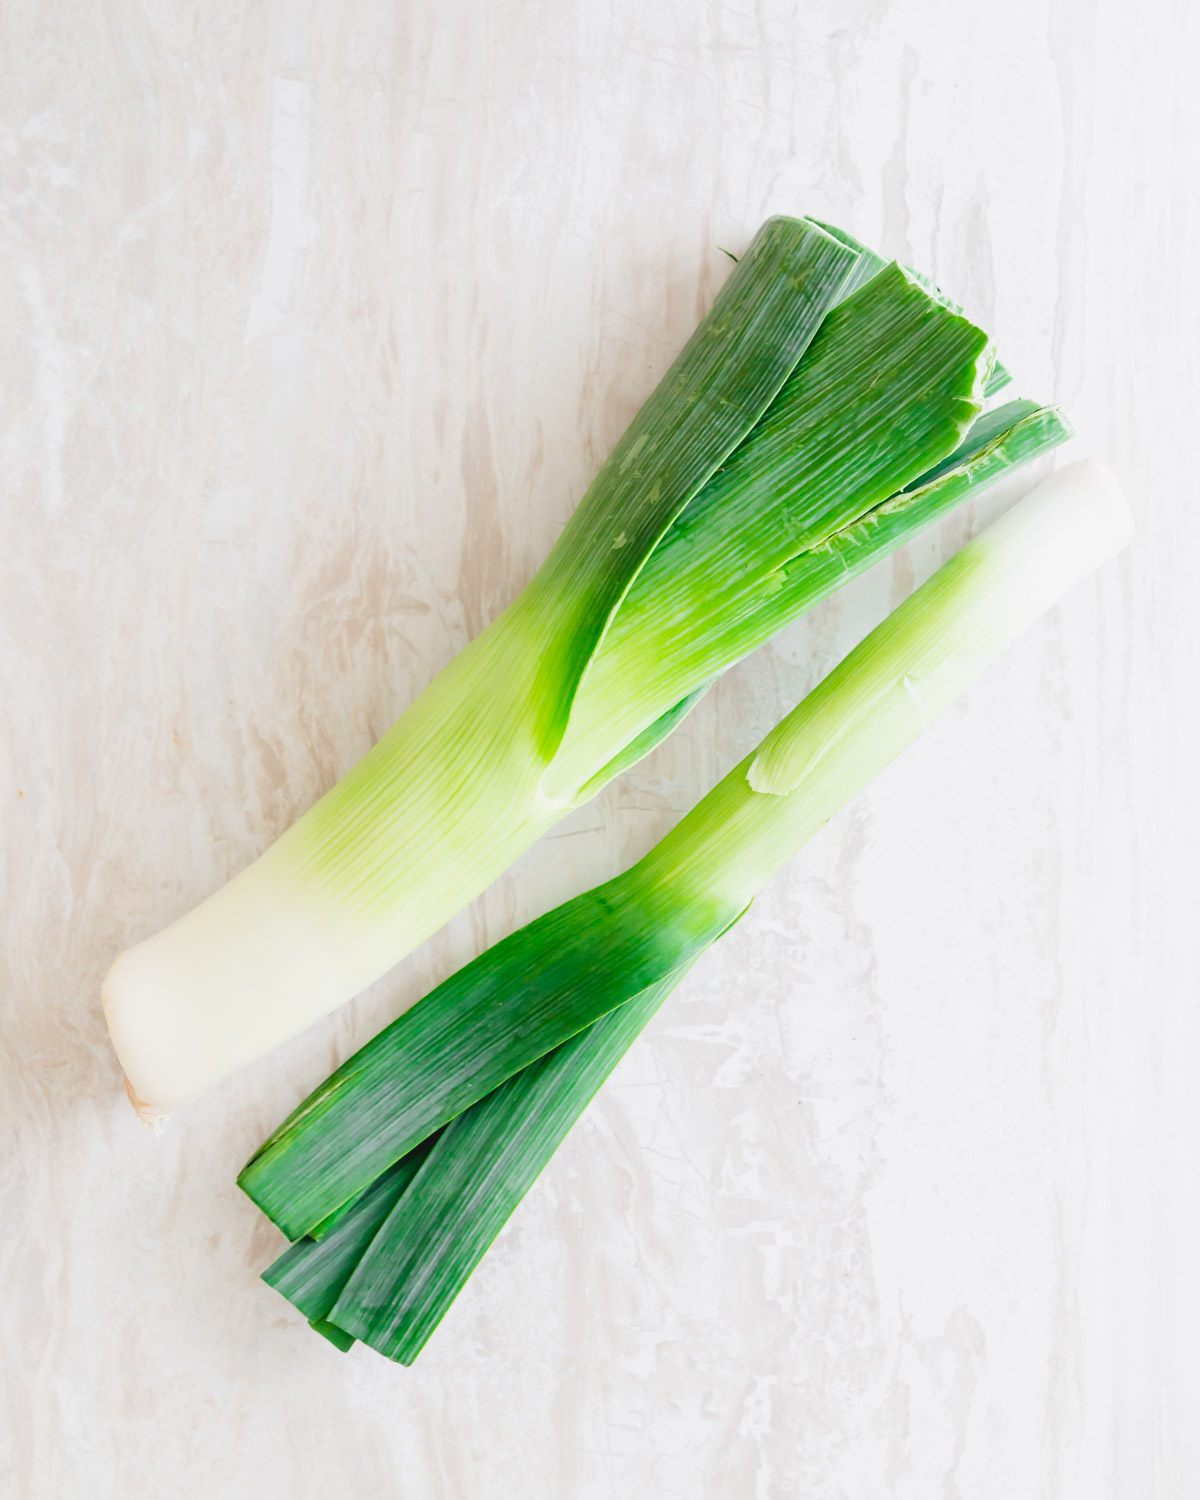 Can Dogs Eat Leeks? - Are Leeks Safe For Dogs to Eat?